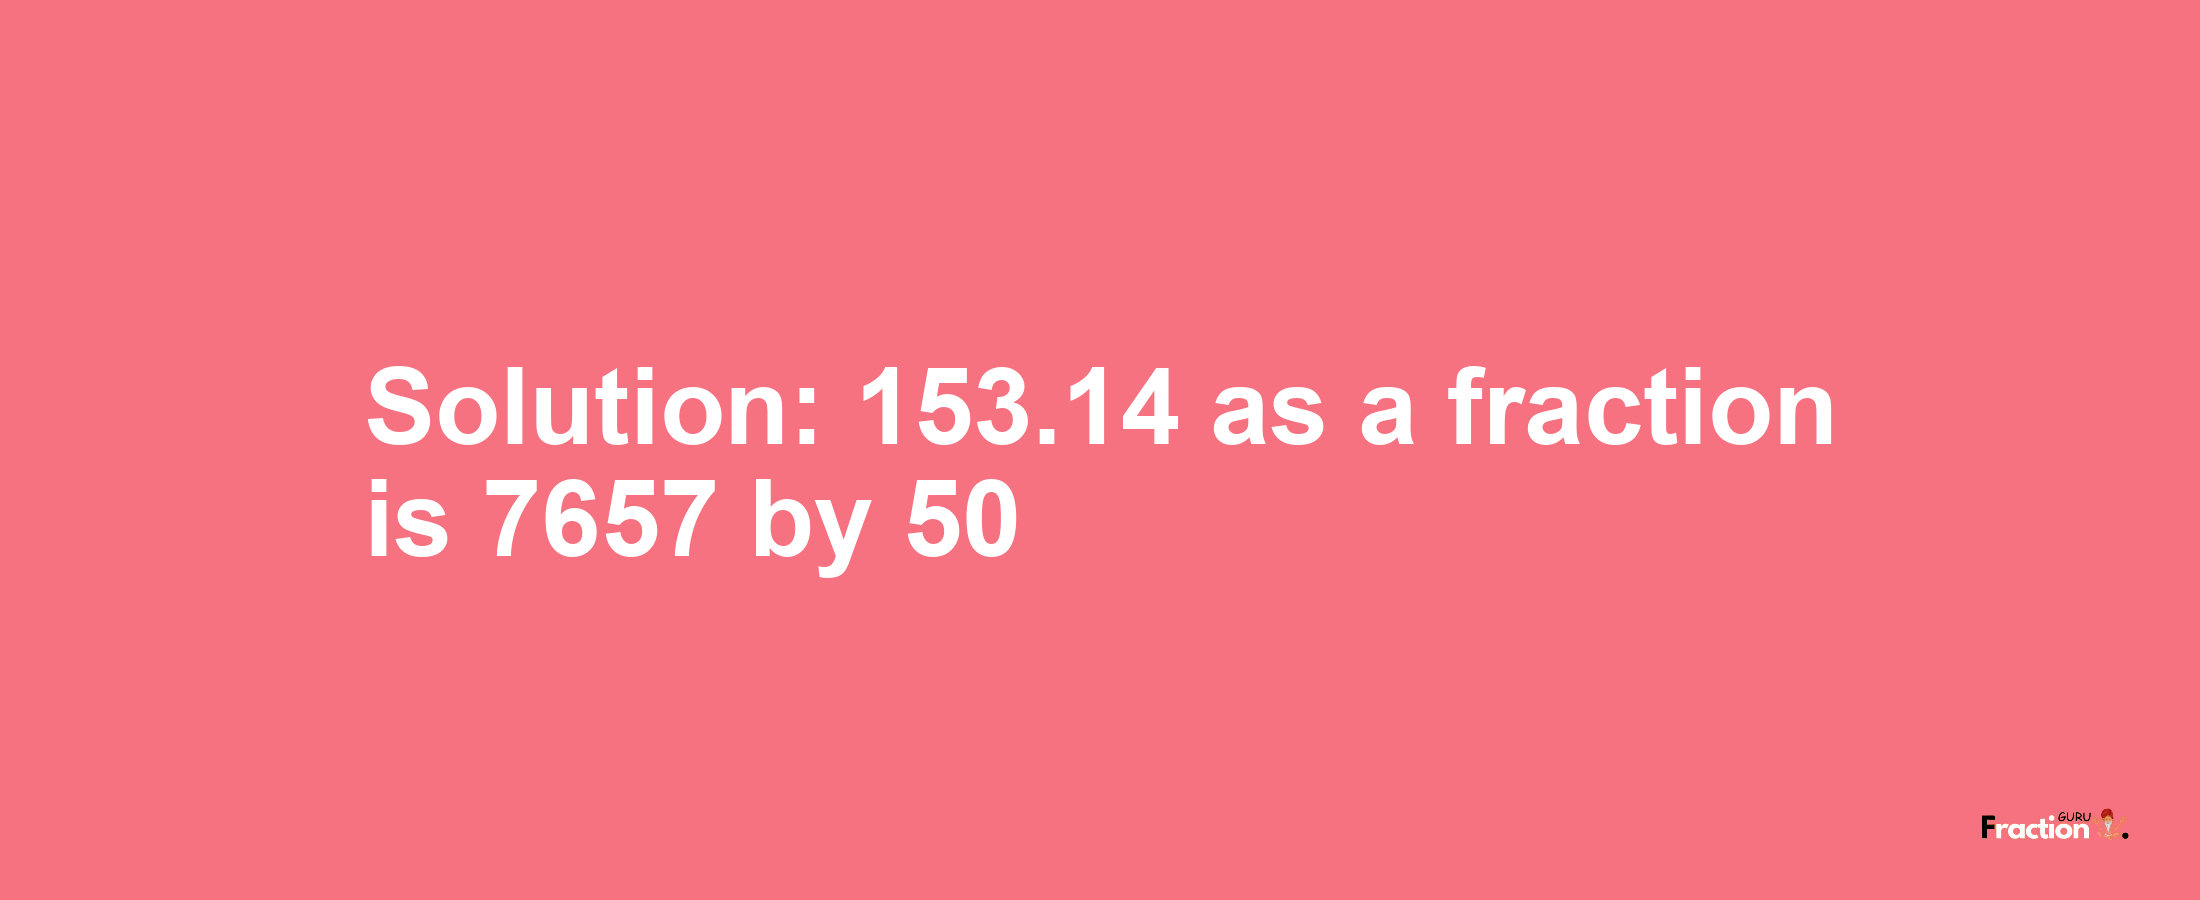 Solution:153.14 as a fraction is 7657/50